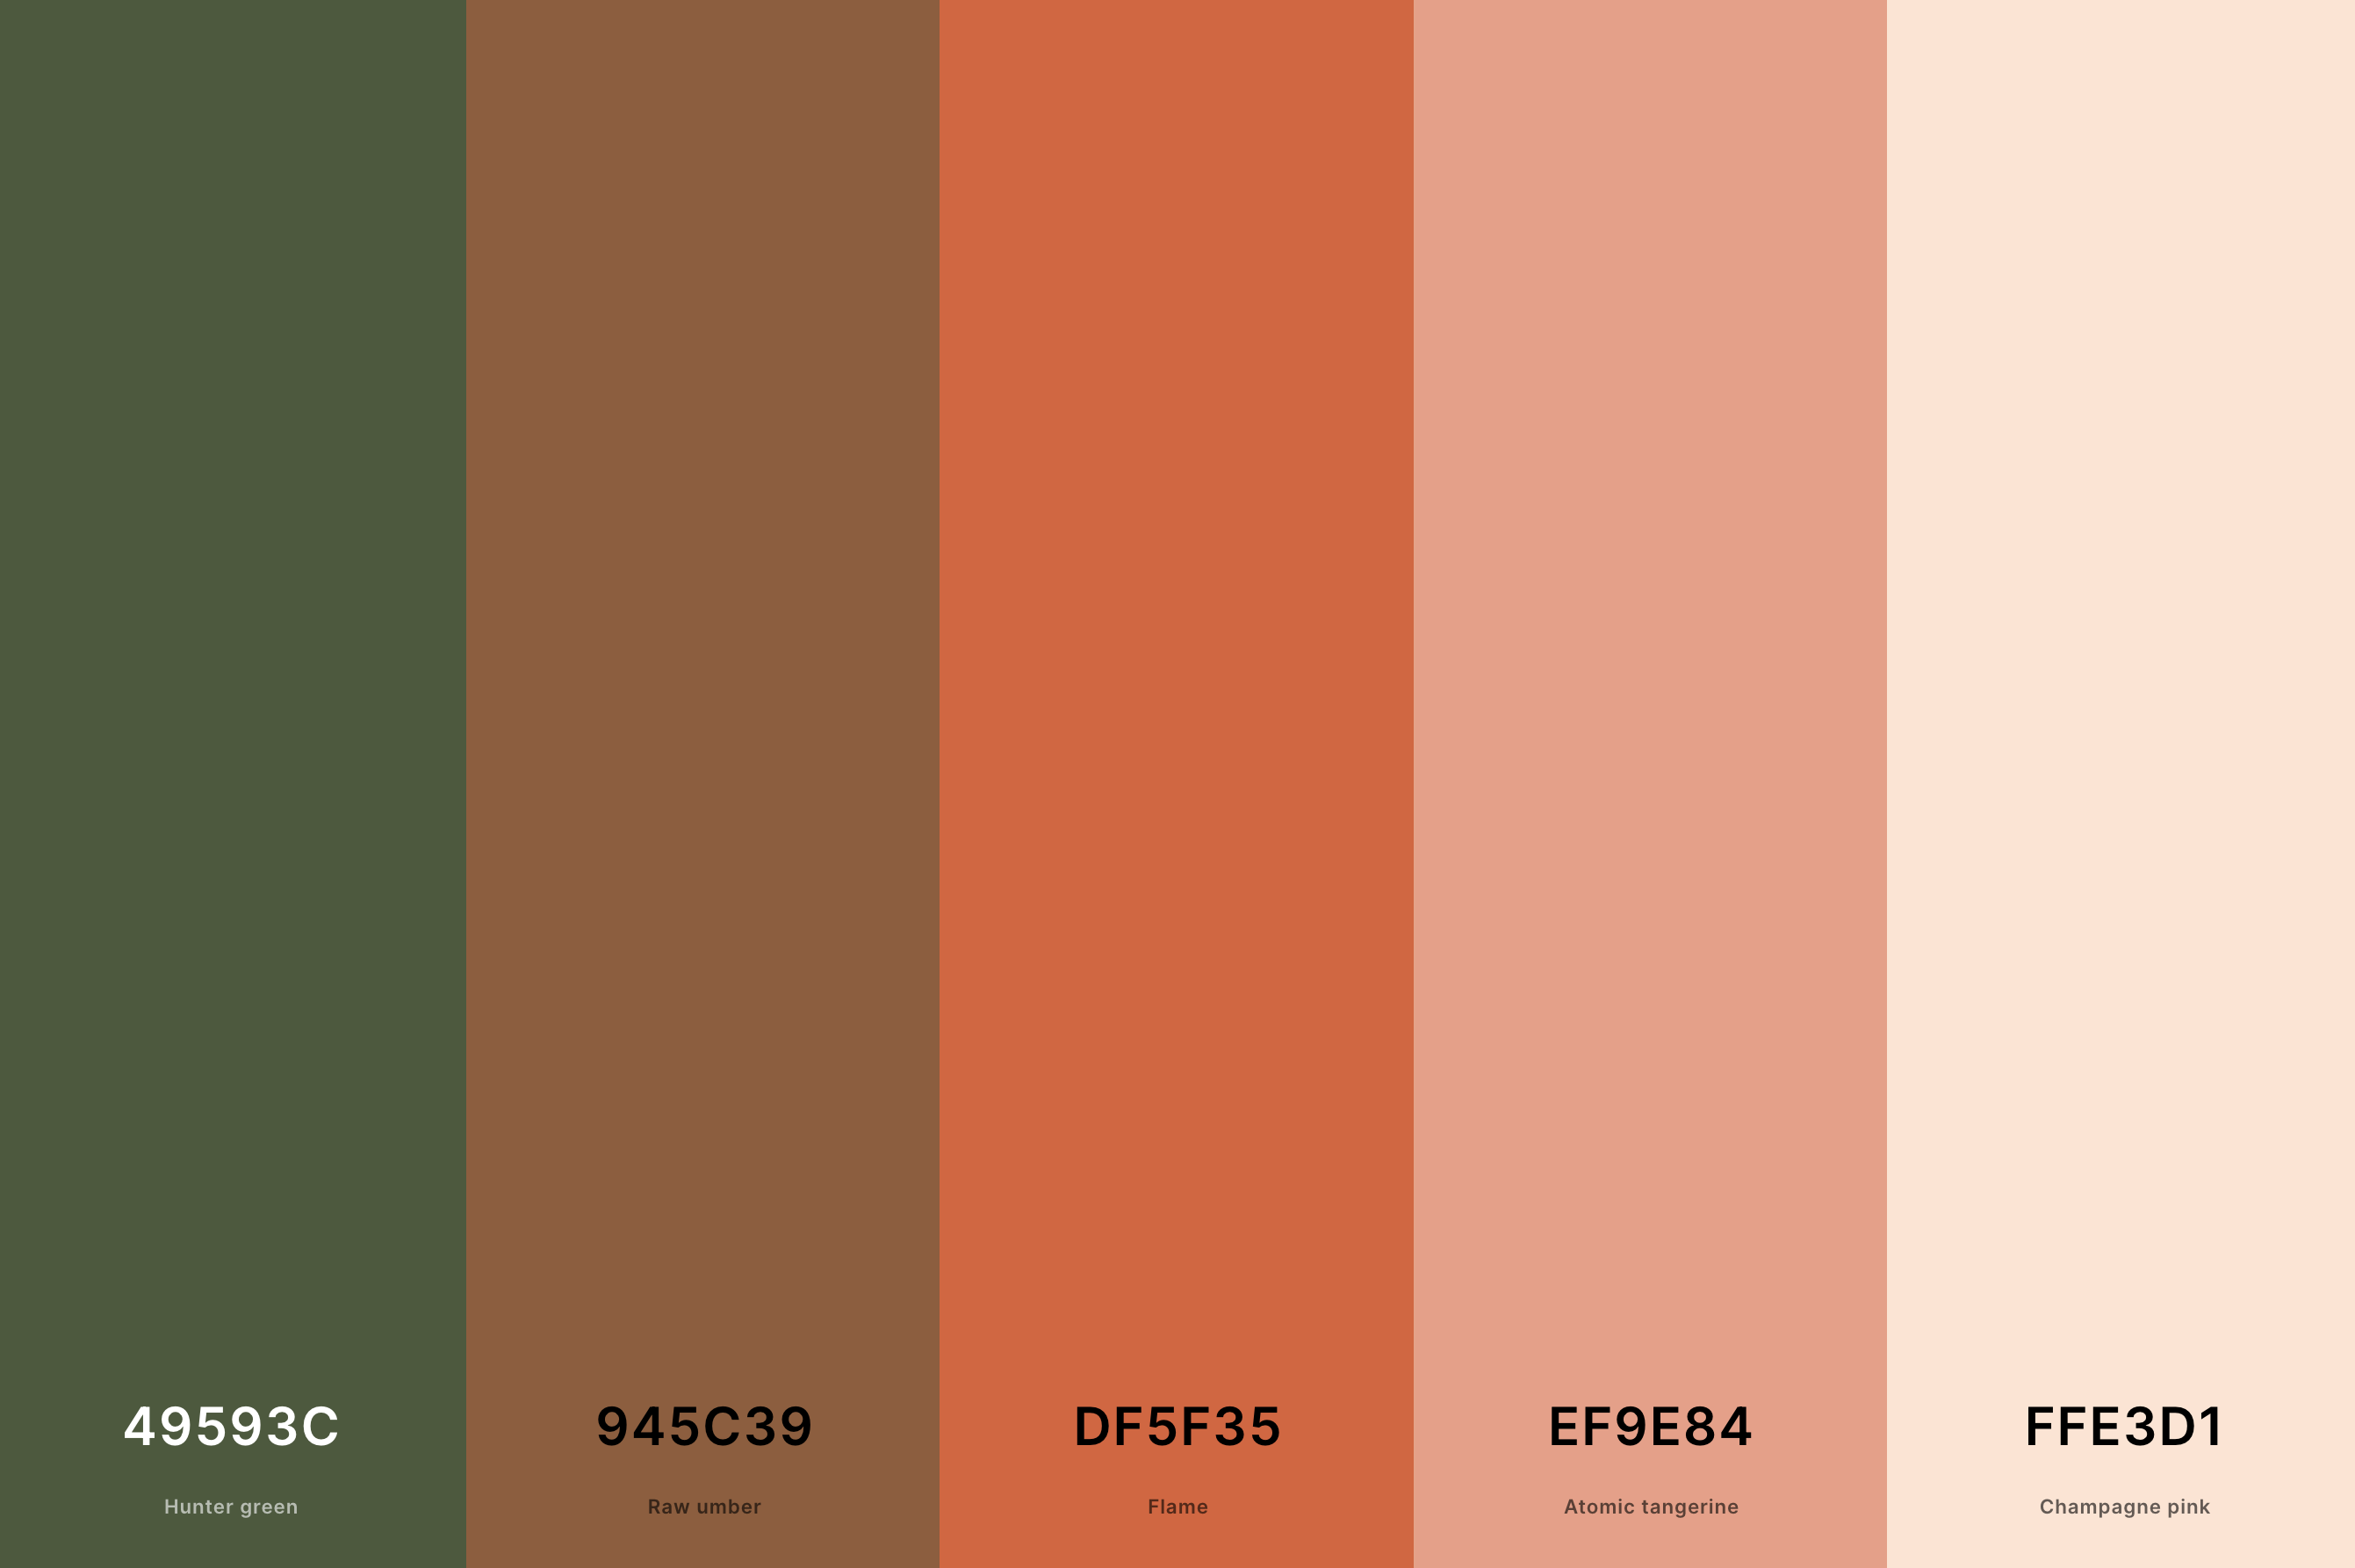 19. Fall Color Palette Aesthetic Color Palette with Hunter Green (Hex #49593C) + Raw Umber (Hex #945C39) + Flame (Hex #DF5F35) + Atomic Tangerine (Hex #EF9E84) + Champagne Pink (Hex #FFE3D1) Color Palette with Hex Codes